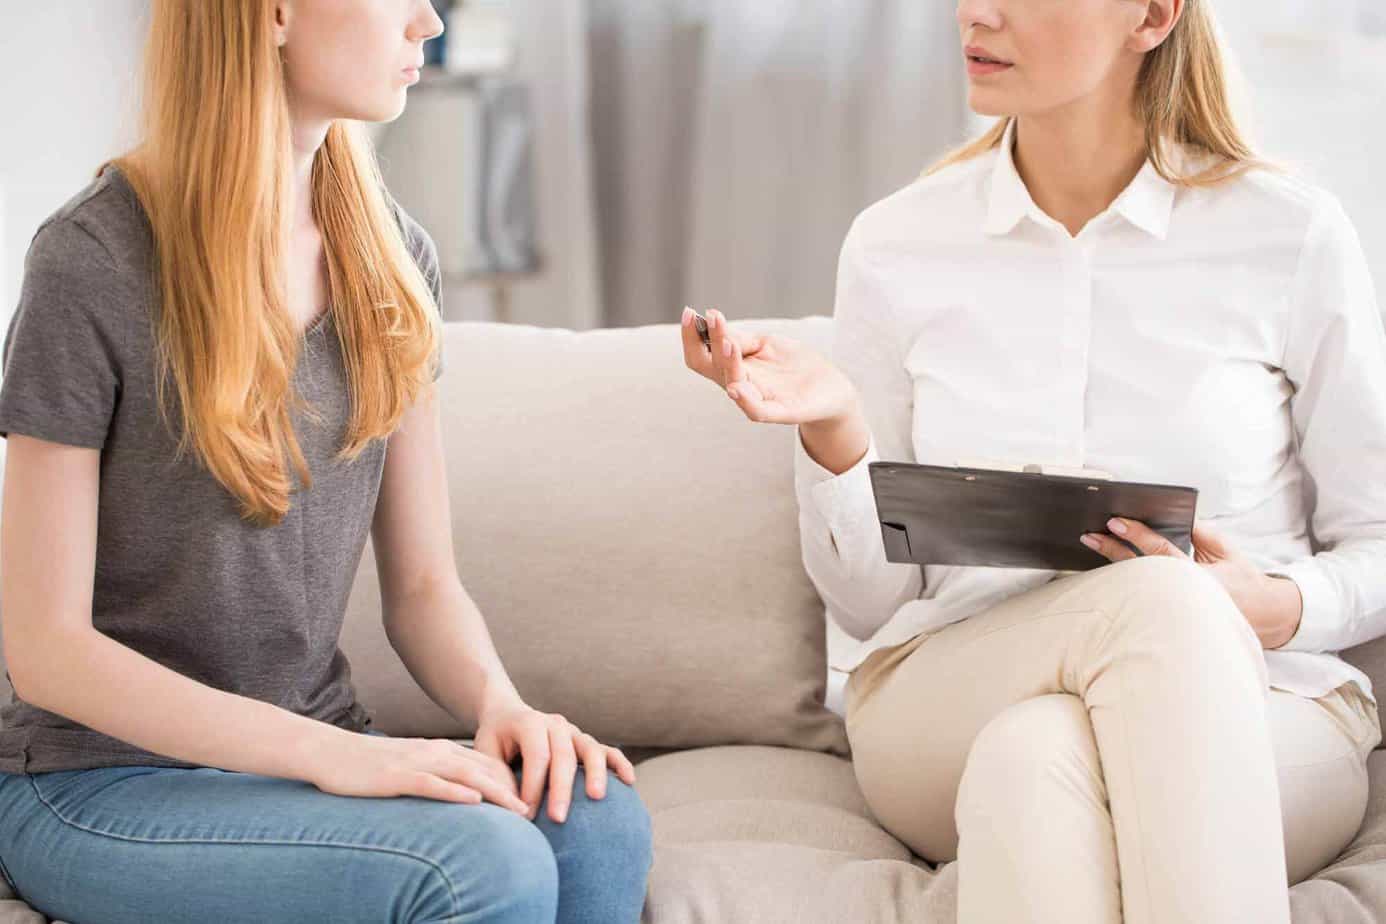 teen counseling